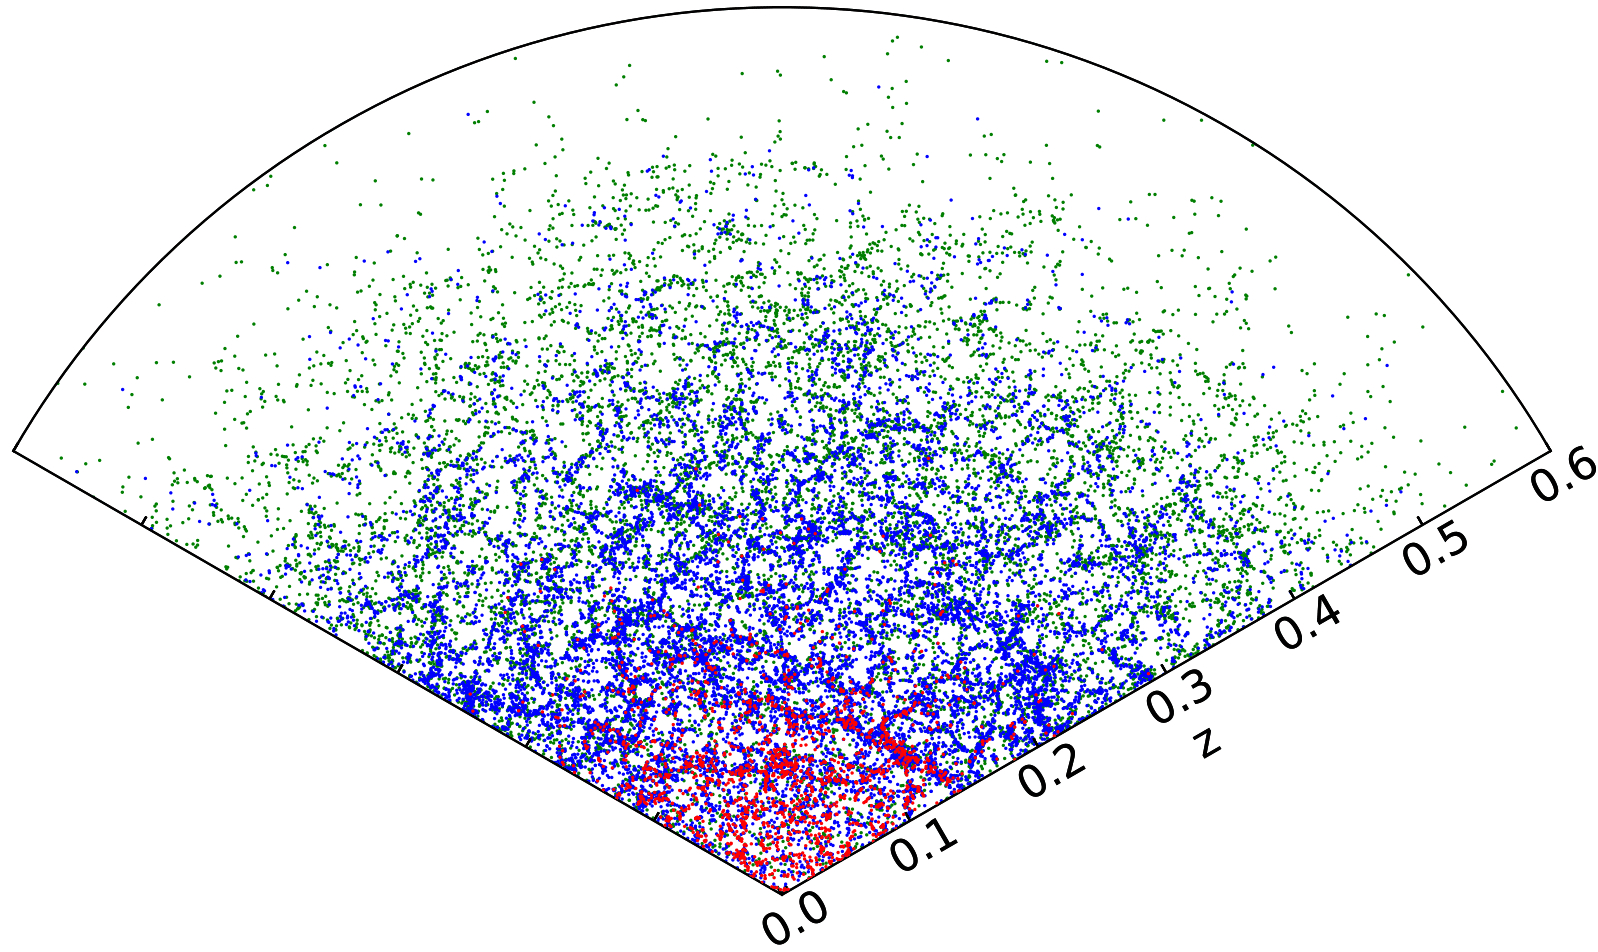 Image - This plot shows a thin slice through a mock galaxies catalog. The blue and green points are “bright” and “faint” galaxies simulated for the Dark Energy Spectroscopic Instrument’s Bright Galaxy Survey, and the red points show galaxies that are brighter than the magnitude limit of the Sloan Digital Sky Survey. (Credit: Alex Smith/Durham University)